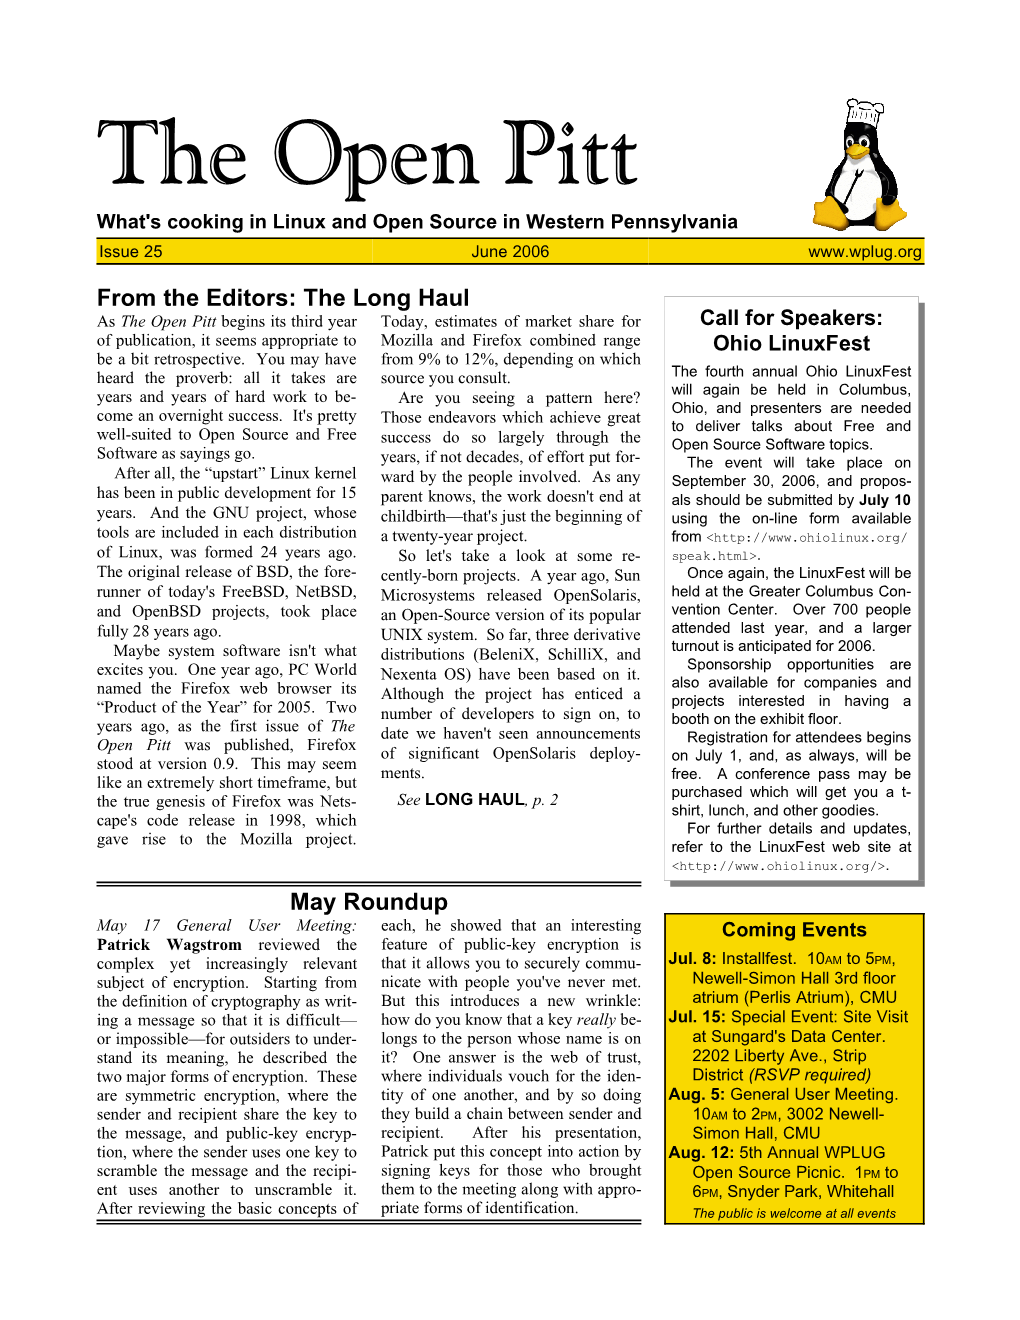 The Open Pitt What's Cooking in Linux and Open Source in Western Pennsylvania Issue 25 June 2006